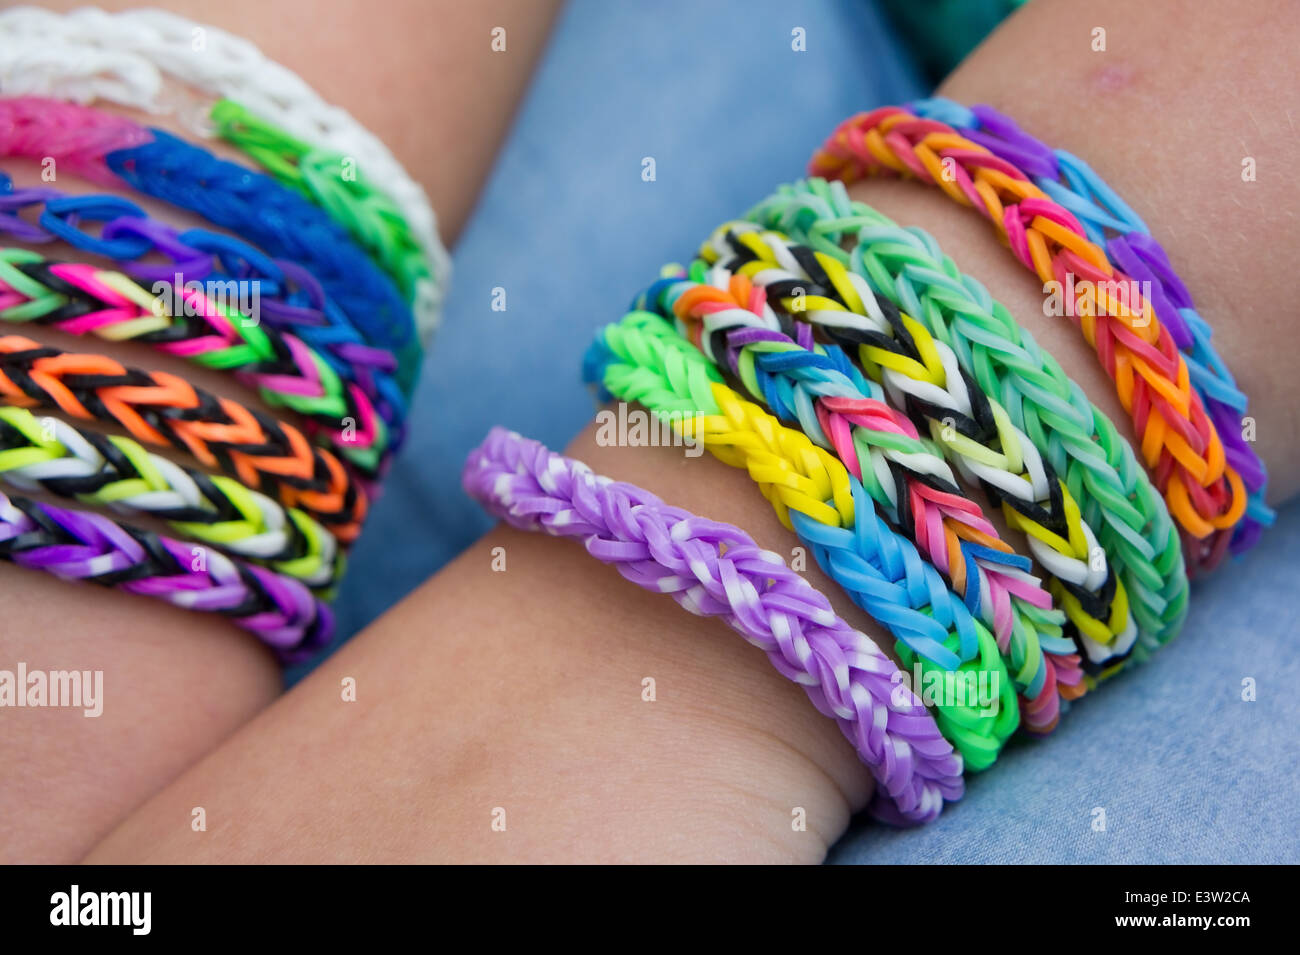 Colorful Rainbow Loom Bracelet Rubber Bands Stock Photo 225478291